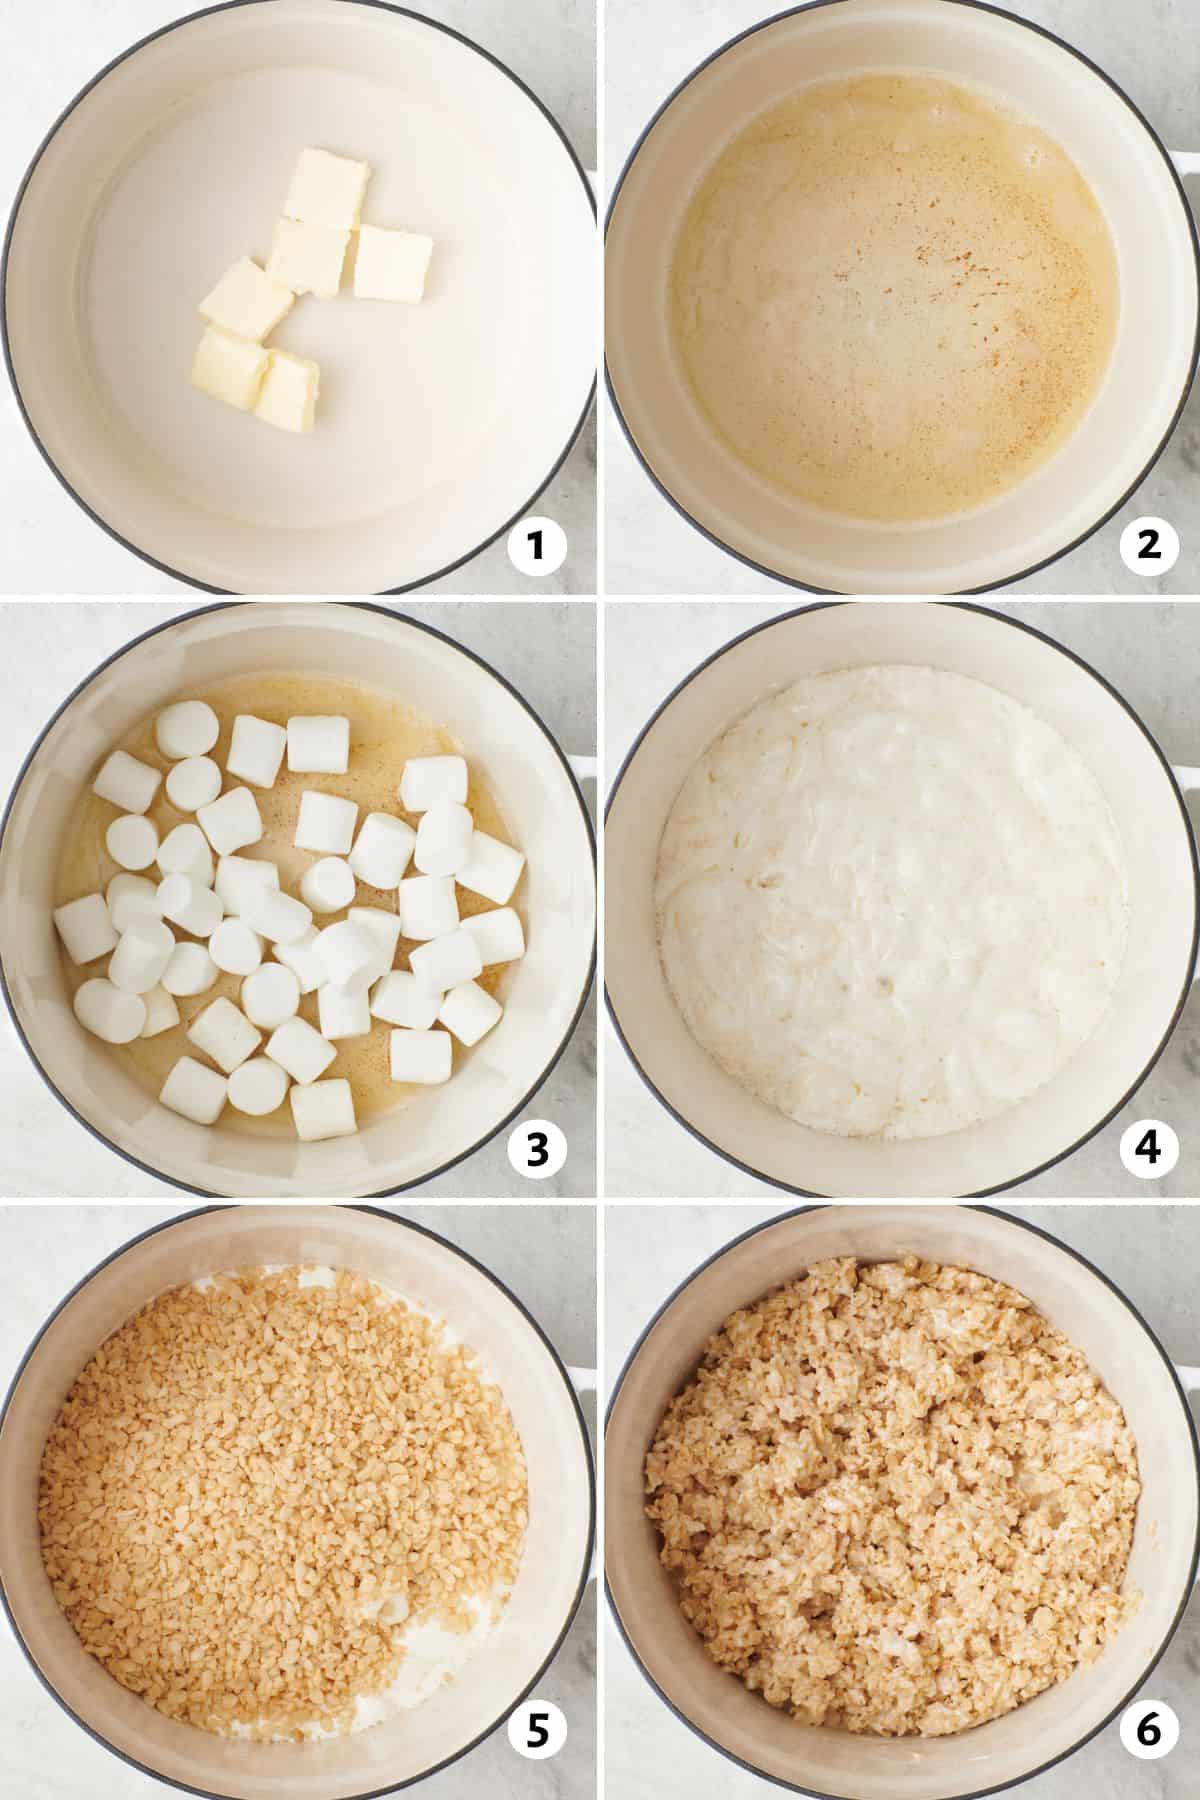 6 image collage making recipe: 1- butter in a pot, 2- after melting, 3- marshmallows added, 4- after melting, 5- rice krispies added, 6- after combined.